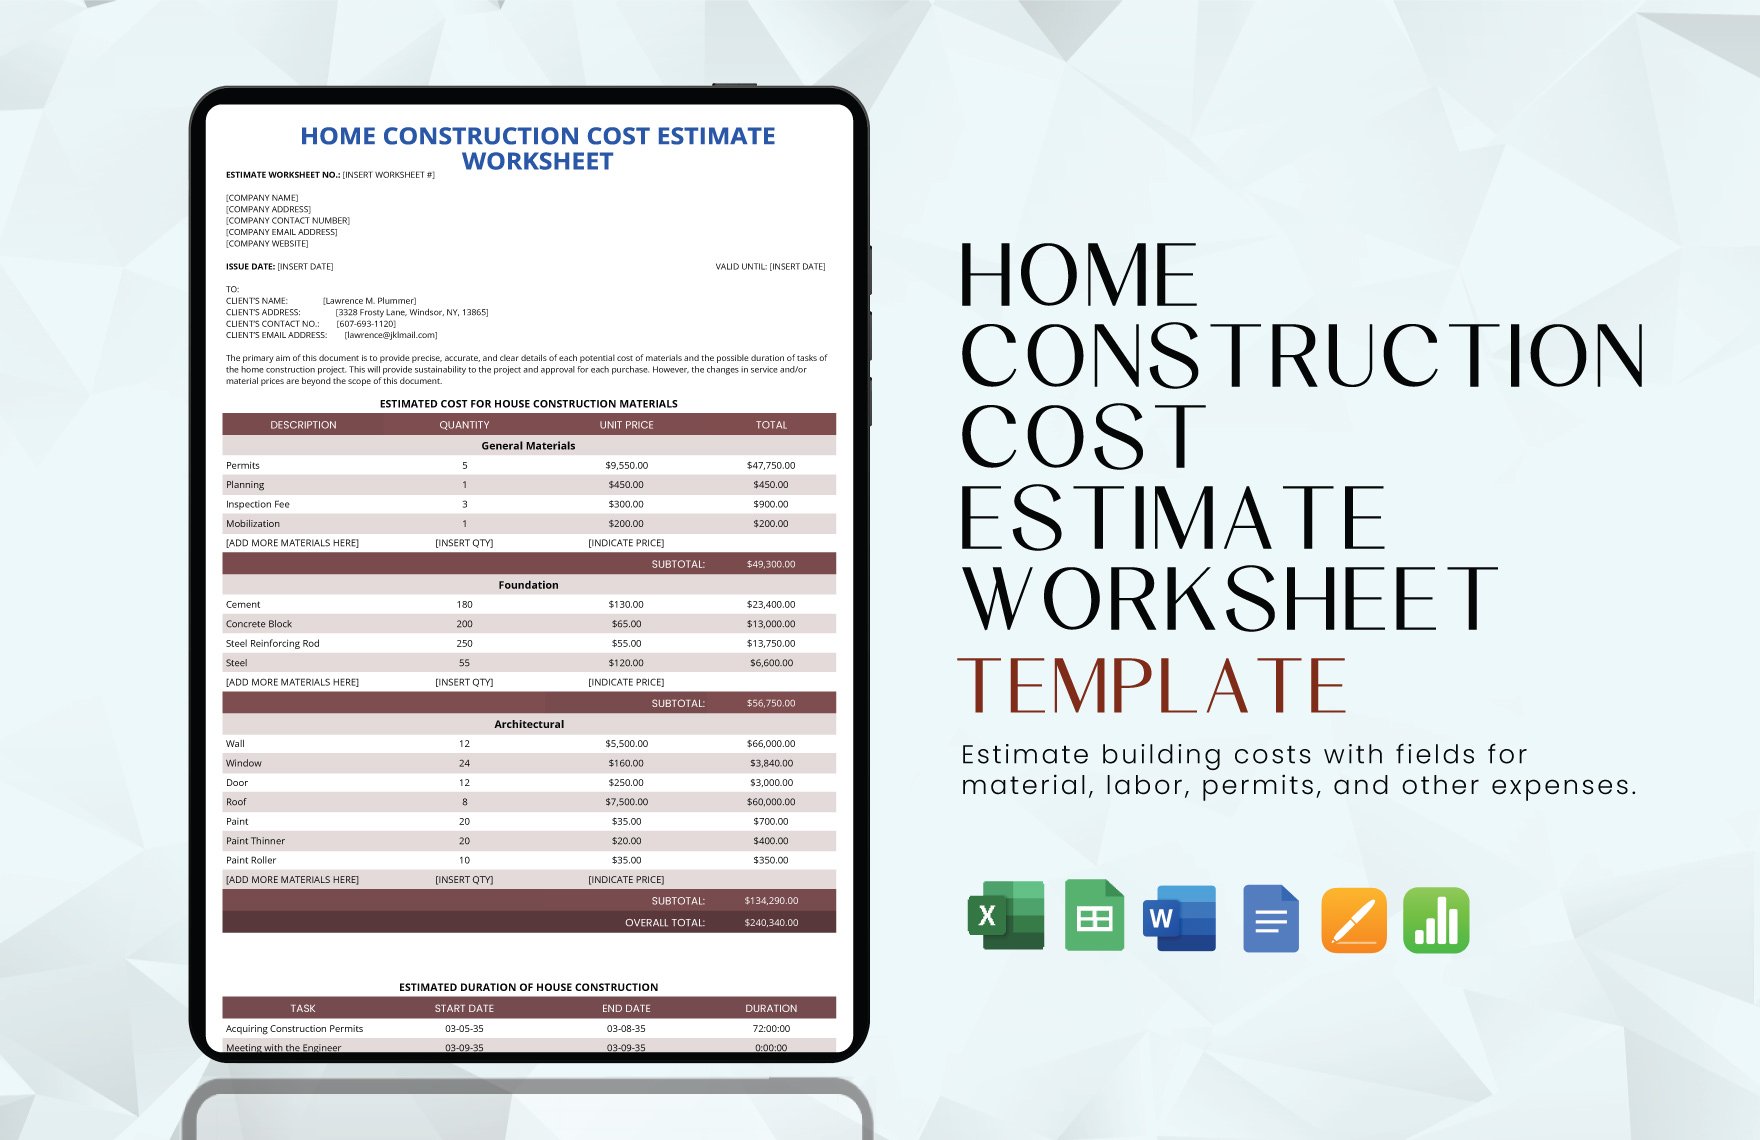 Home Construction Cost Estimate Worksheet Template in Word, Google Docs, Excel, Google Sheets, Apple Pages, Apple Numbers